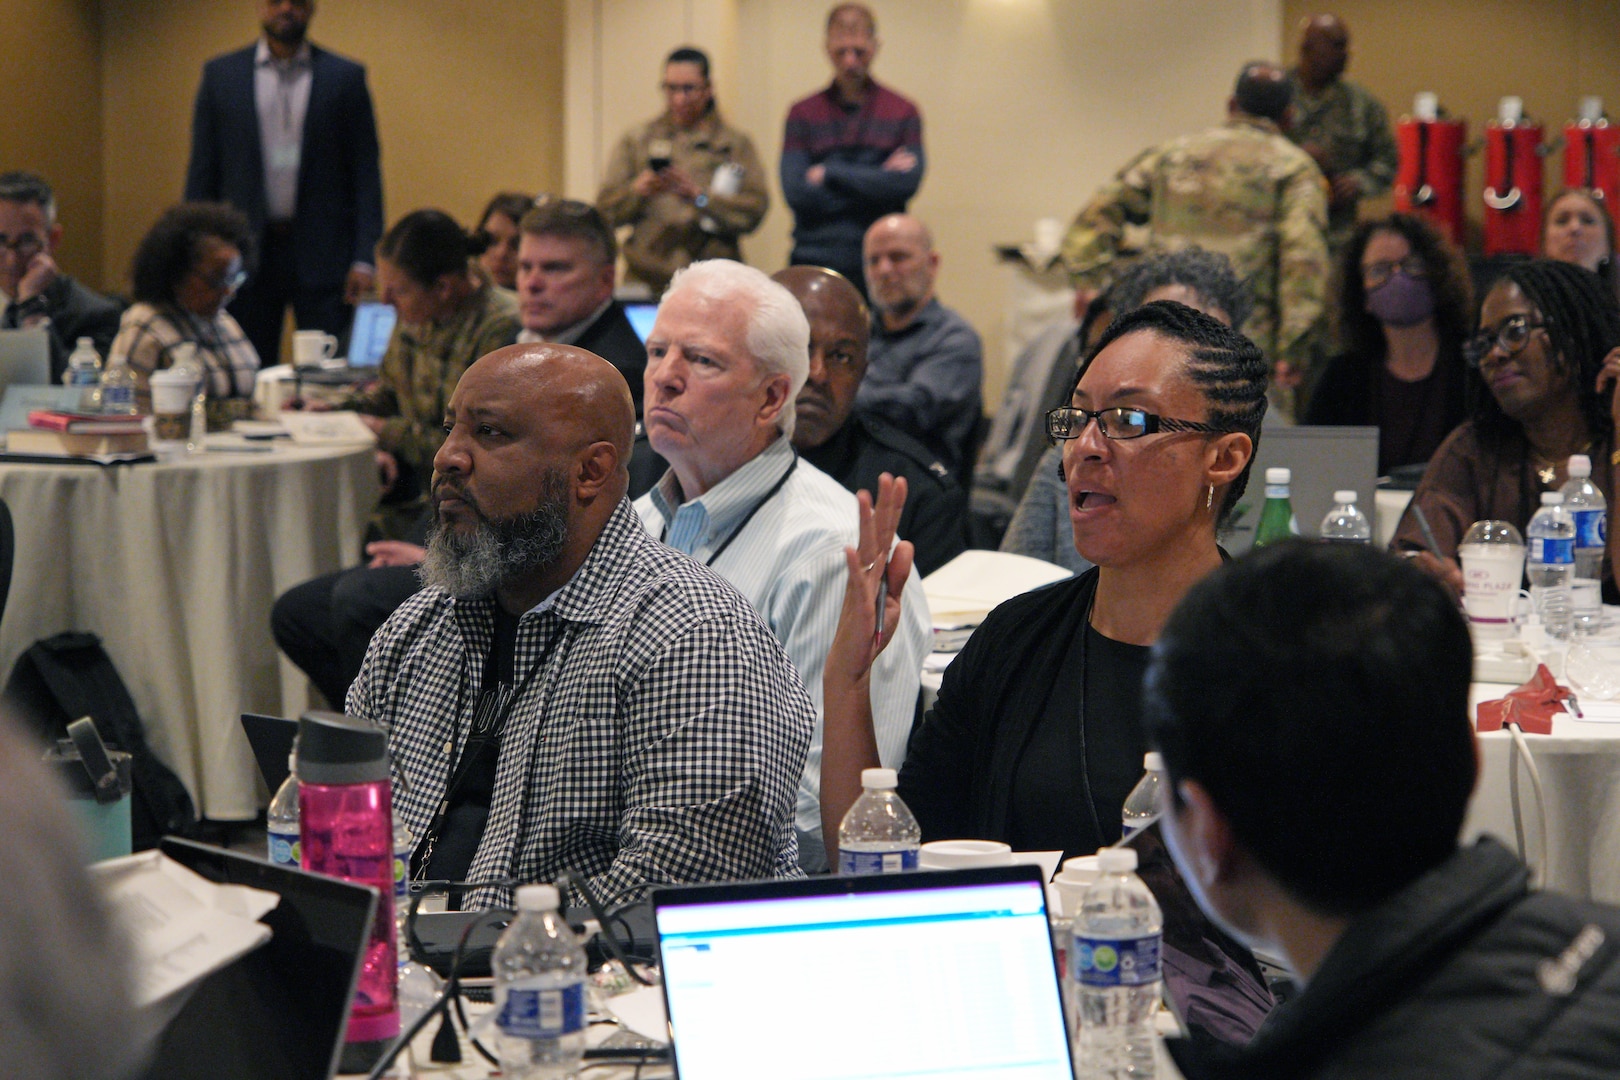 Chief Medical Officers from MEPS across the country provide feedback on medical operations to USMEPCOM leadership during the 2023 Medical Leadership Training Symposium (MLTS).